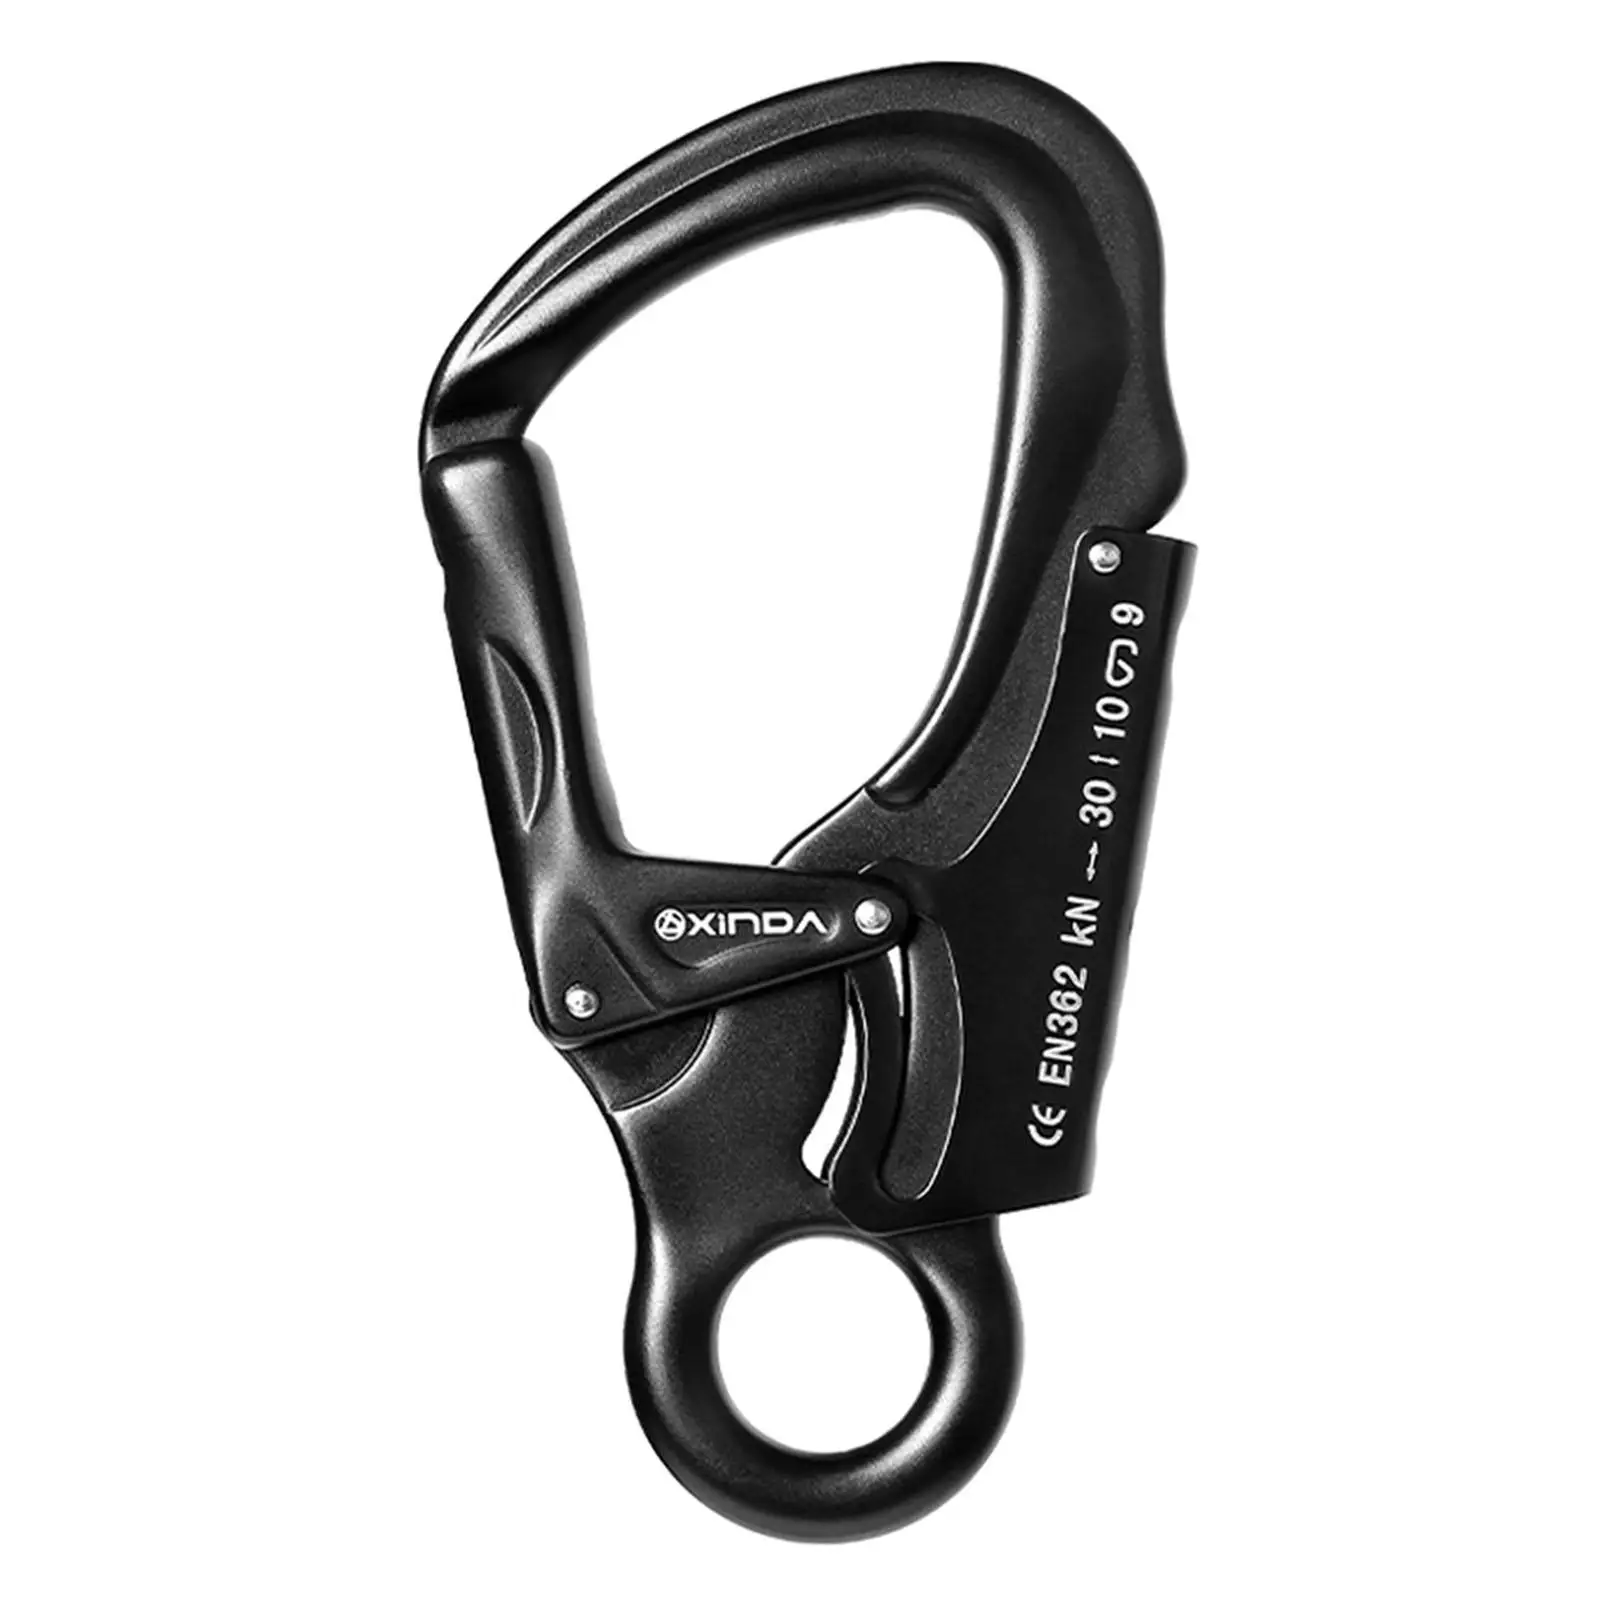 Auto Locking Carabiner Keychain Aluminum Alloy for Outdoor Climbing Swing